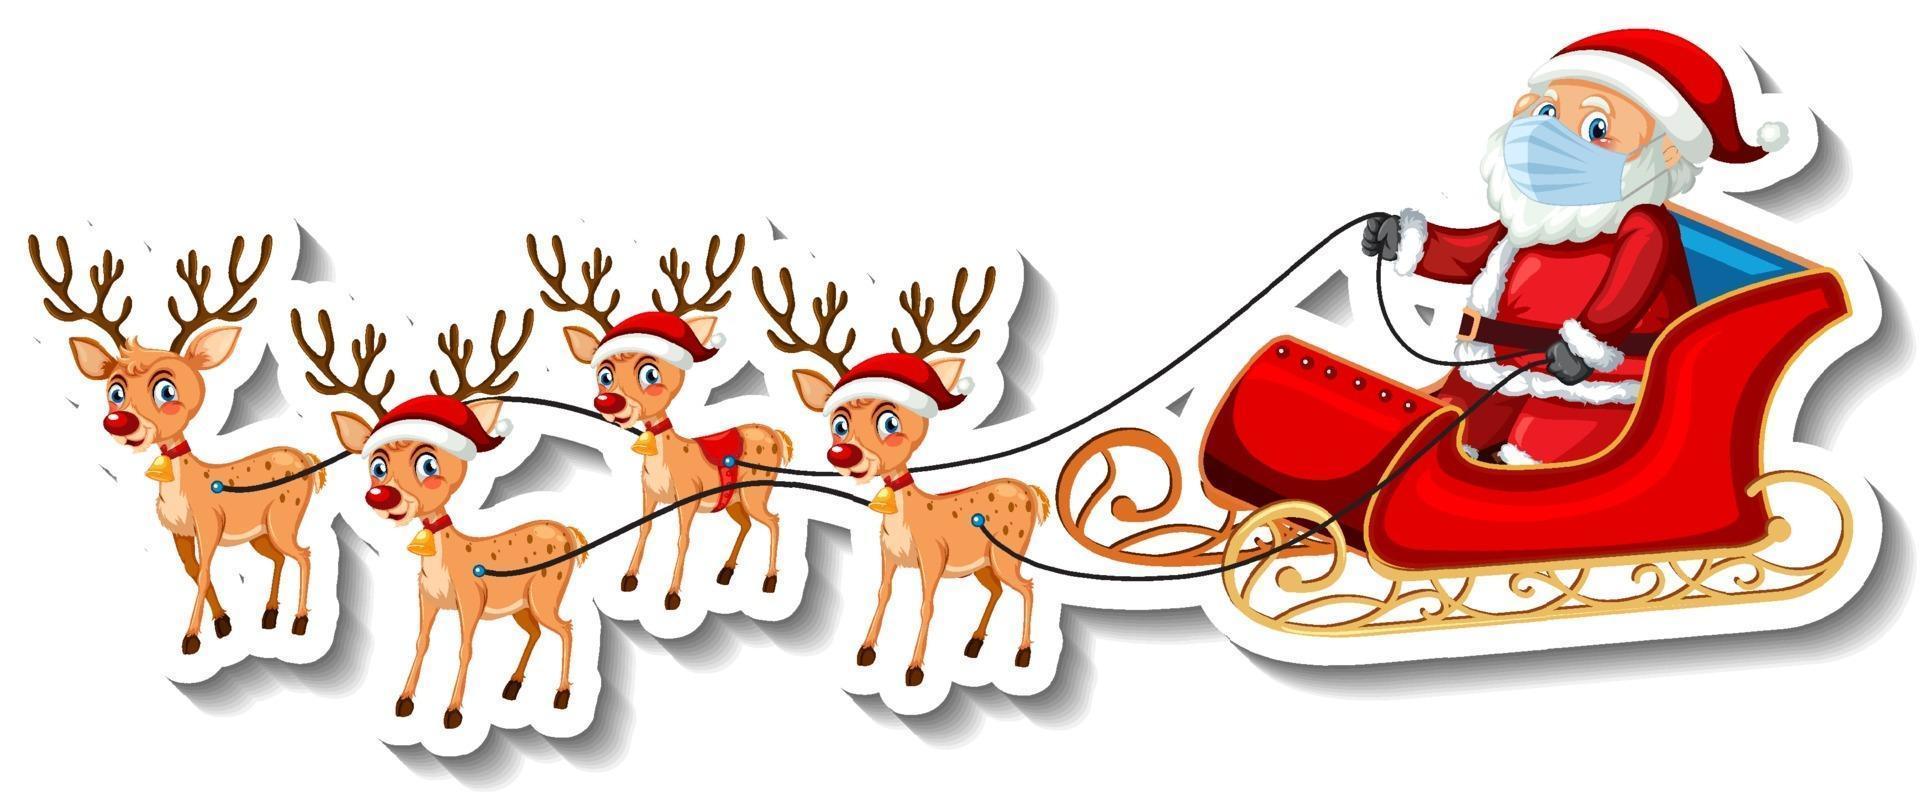 A sticker template with Santa Claus on sleigh and reindeers vector